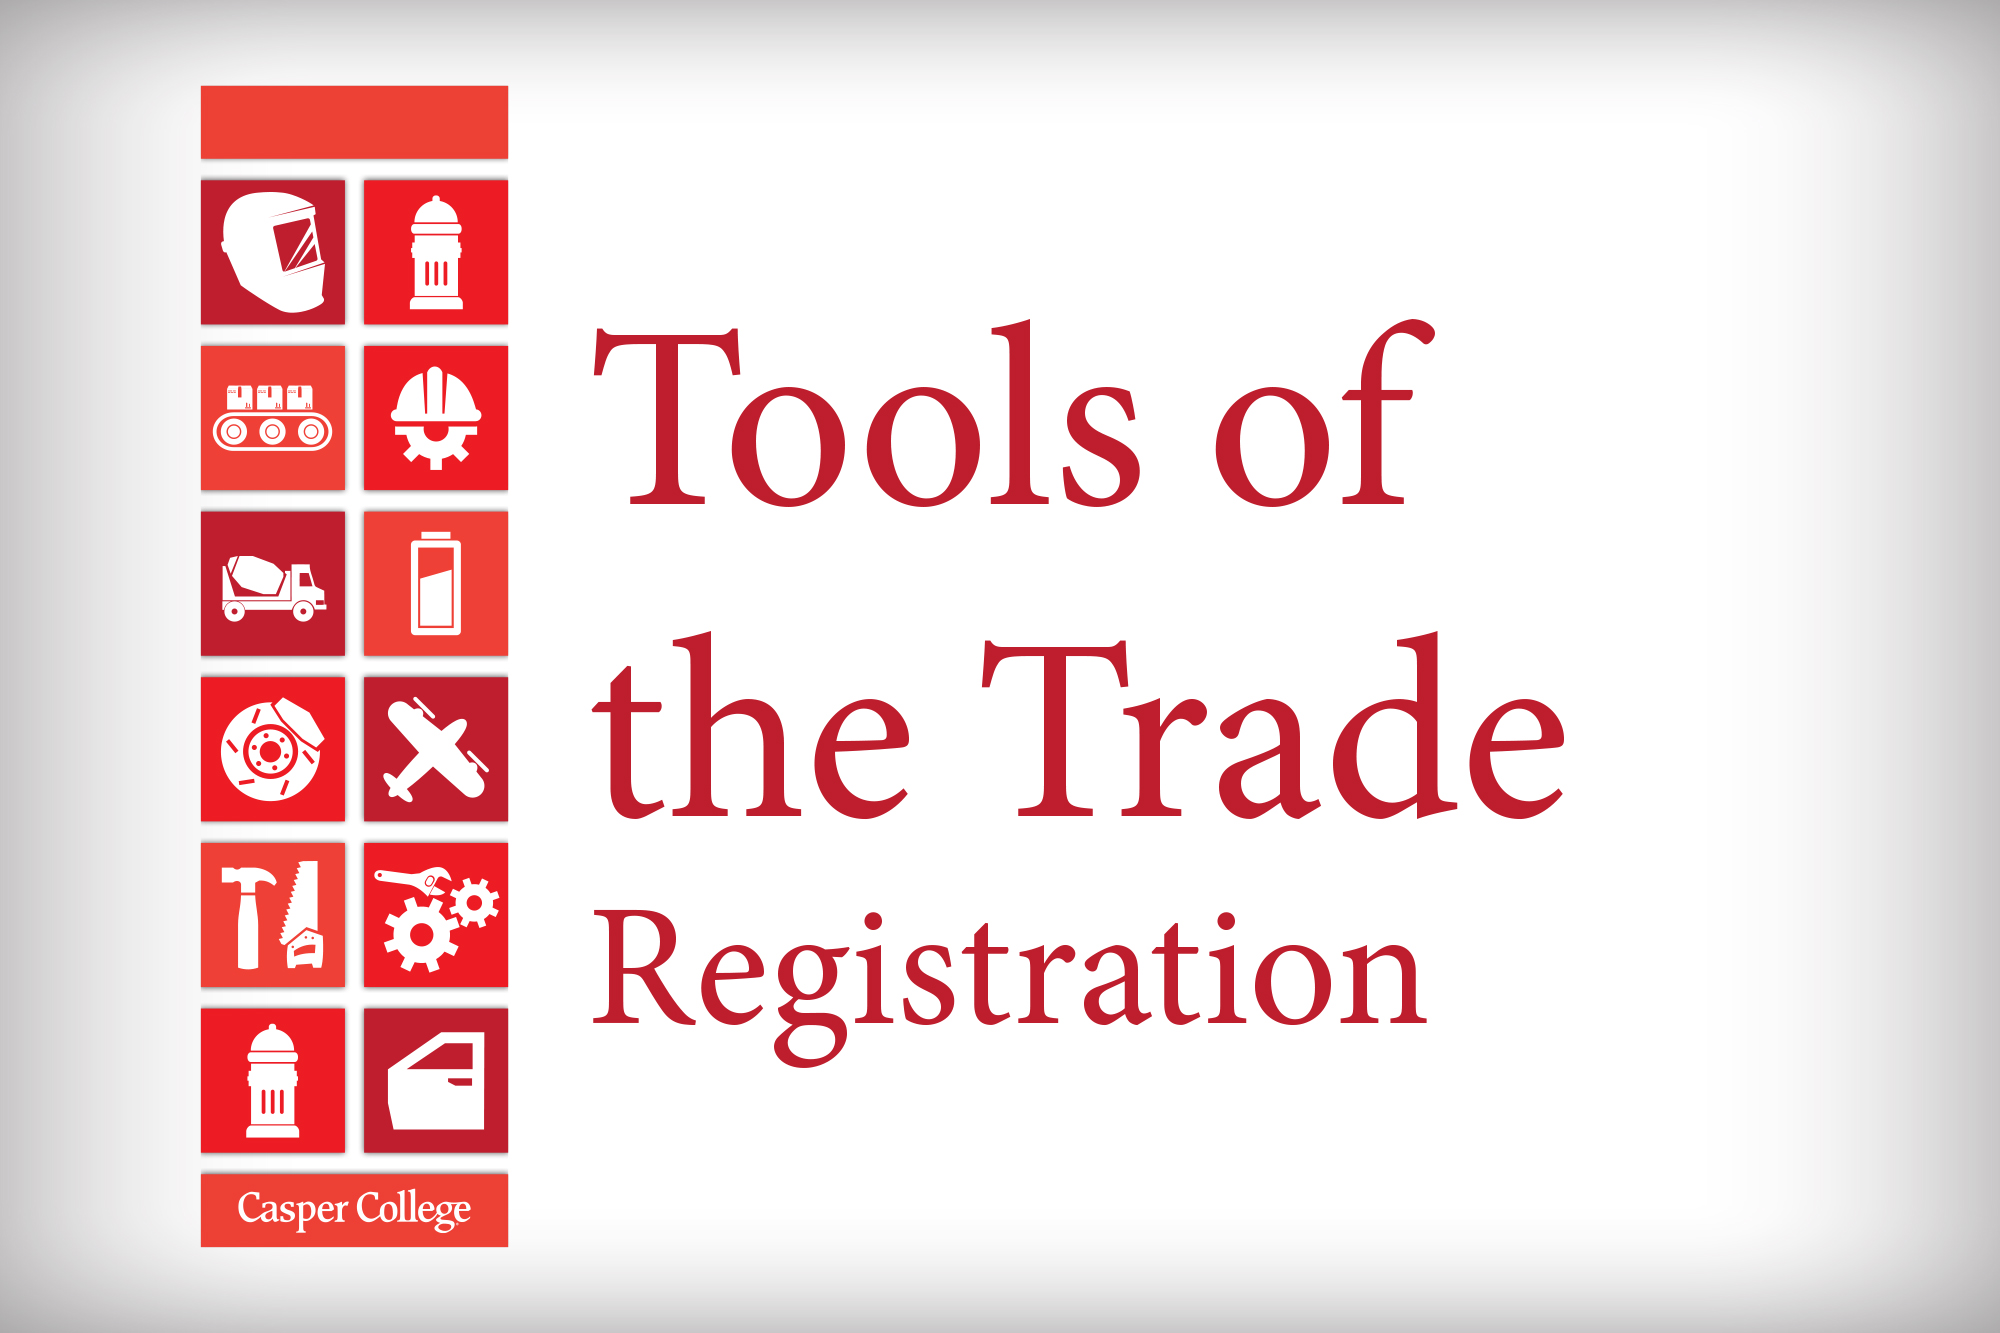 Image for Tools of the Trade press release.